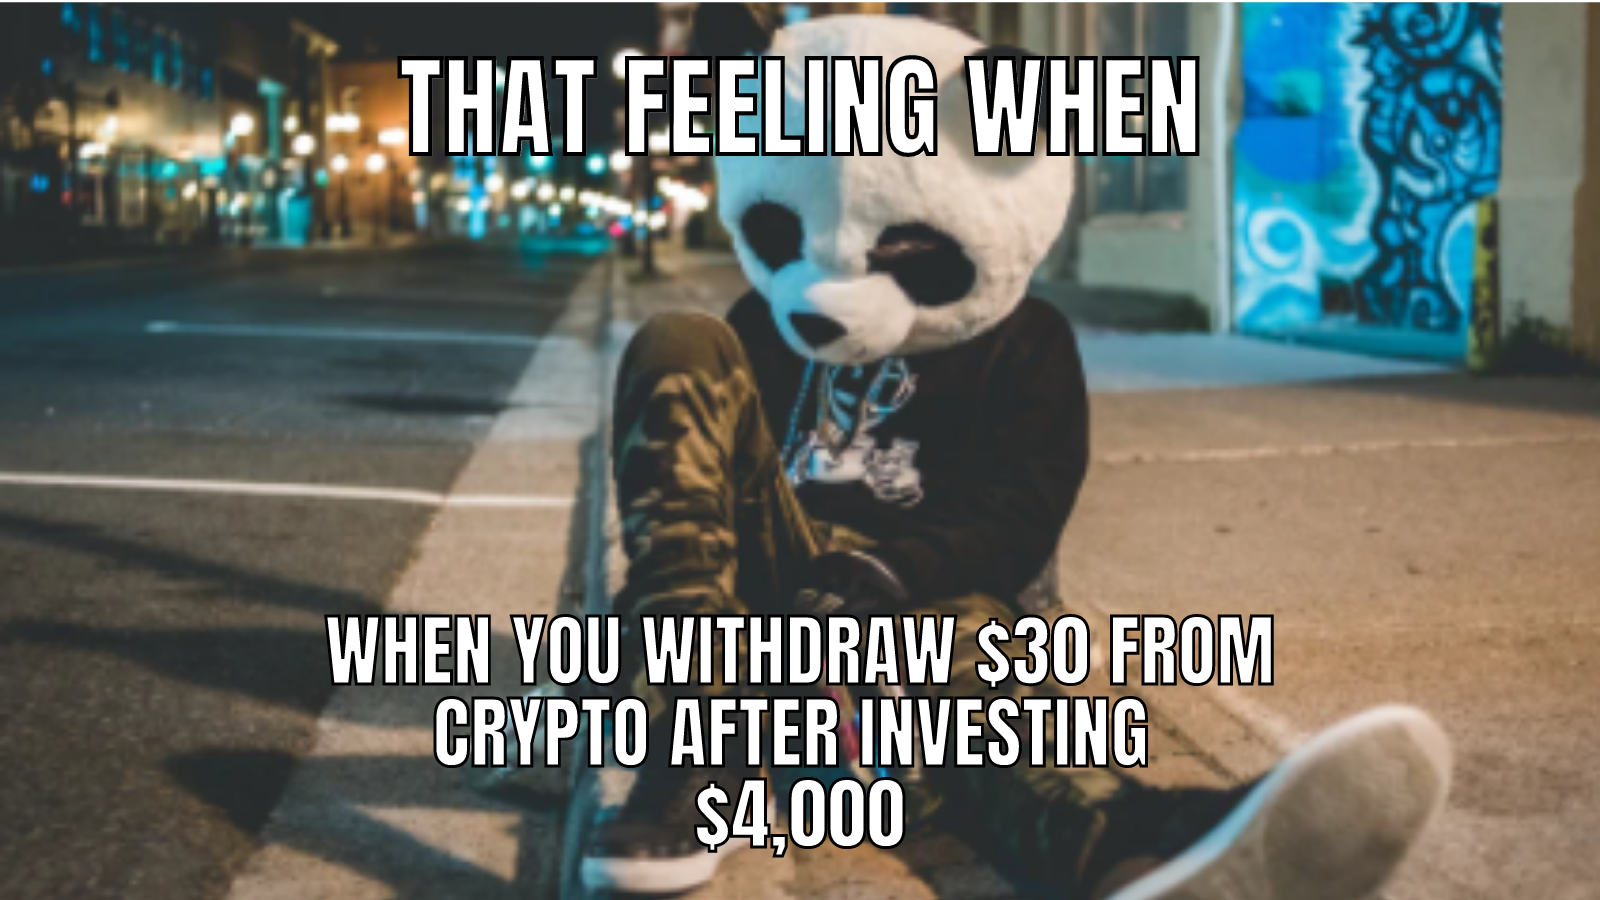 Bitcoin Meme: What's the psychology behind its upswing when things are going low? 10